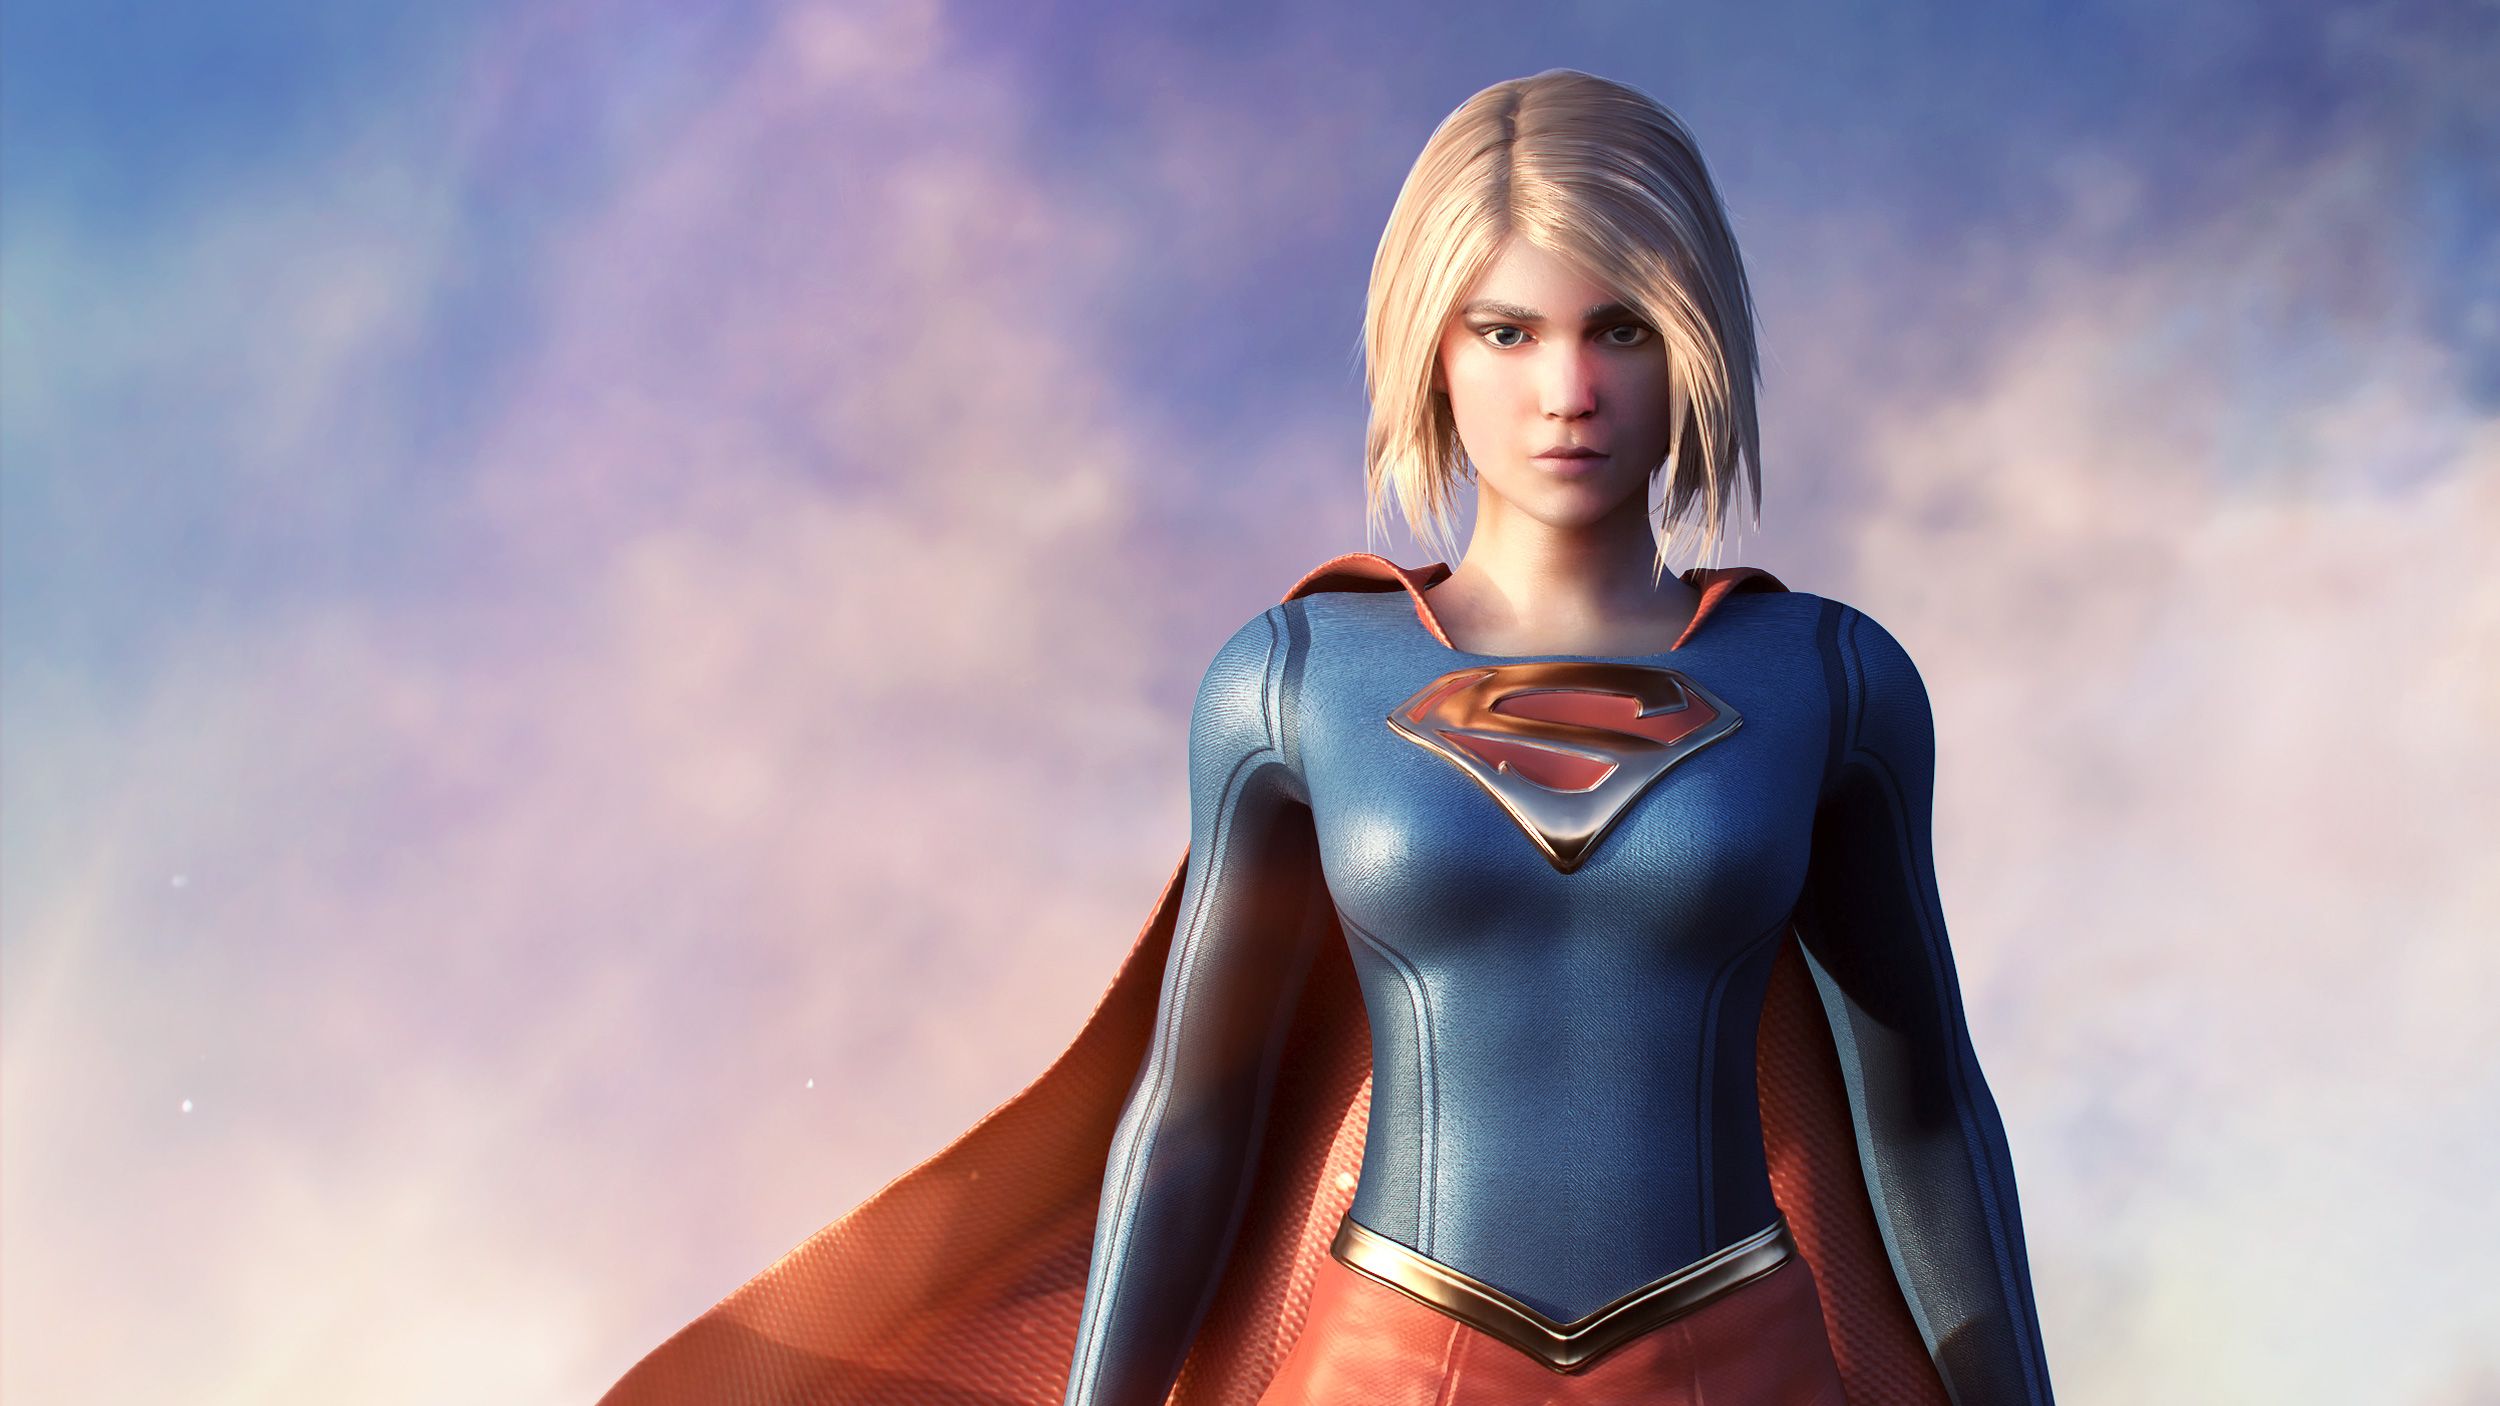 Super Girl Artwork, HD Superheroes, 4k Wallpaper, Image, Background, Photo and Picture